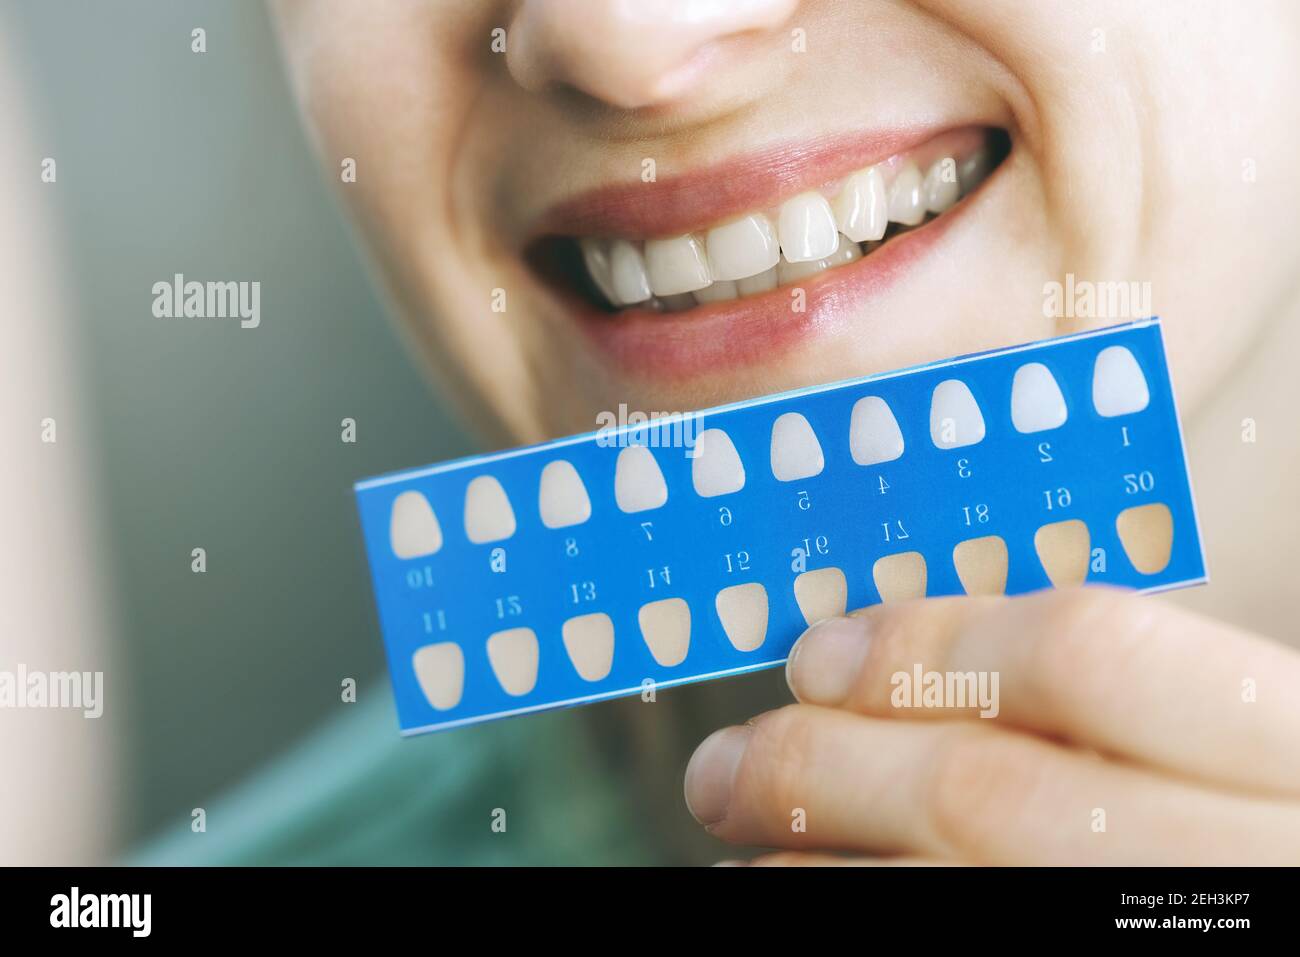 woman using teeth whitening shade guide in front of mirror. tooth bleaching Stock Photo